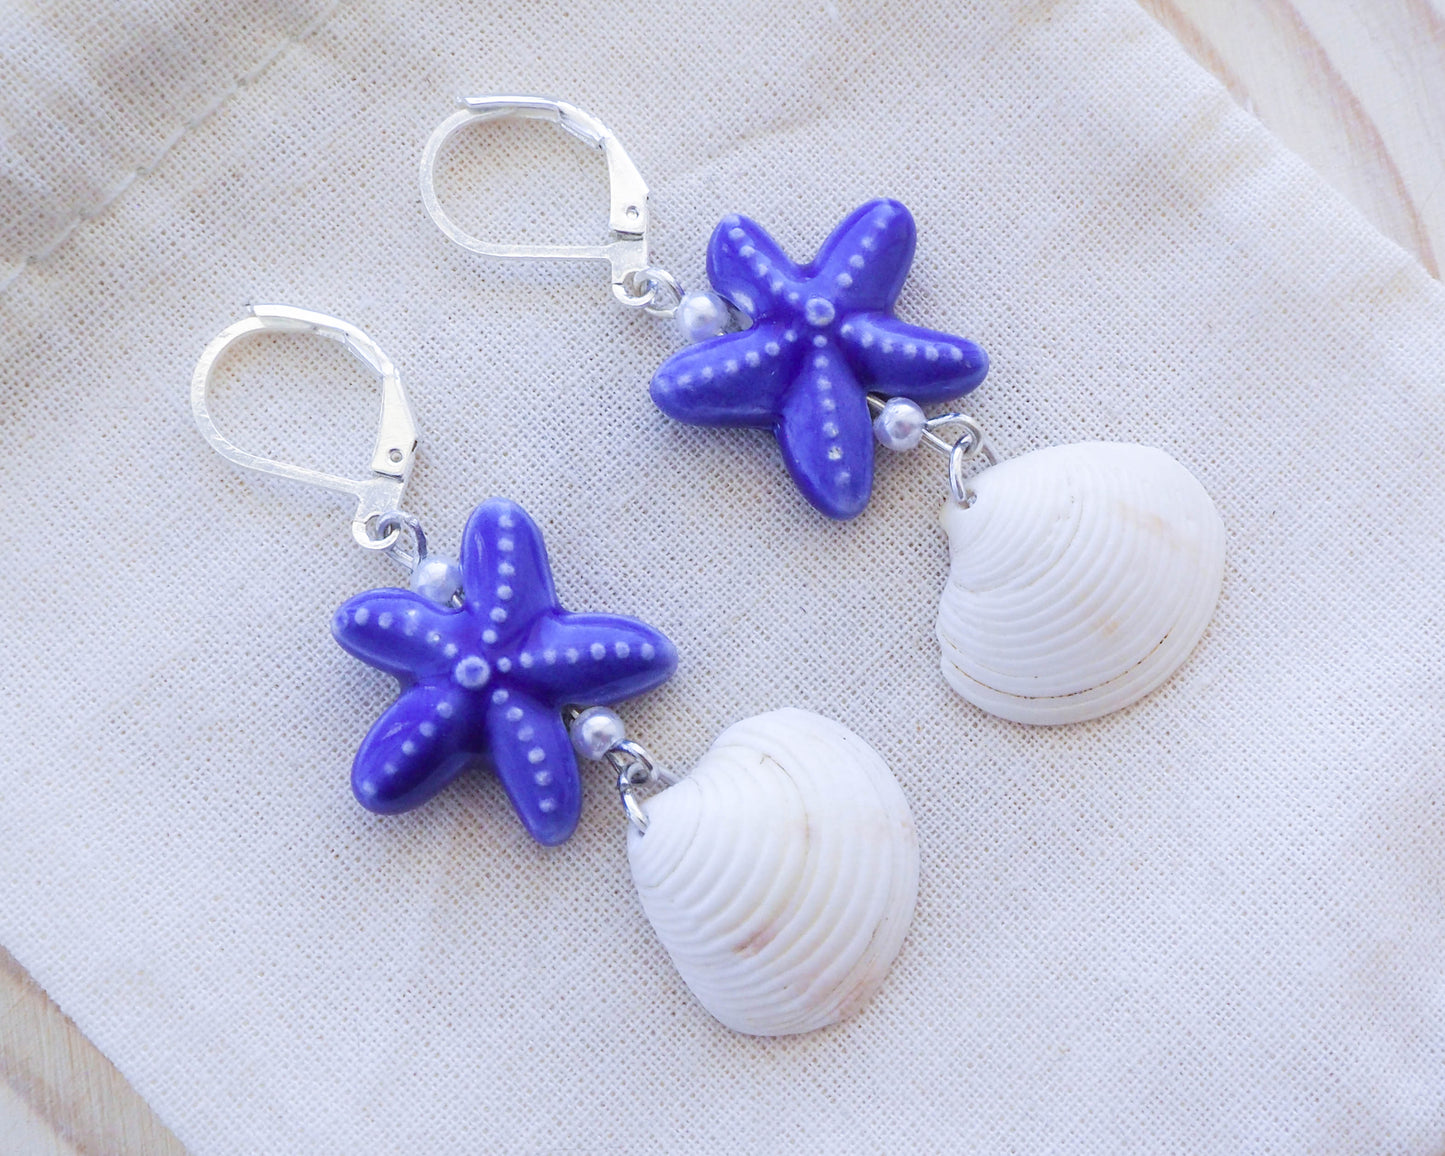 Ocean-Inspired Silver Earrings with Blue Ceramic Sea Stars and White Venus Shell